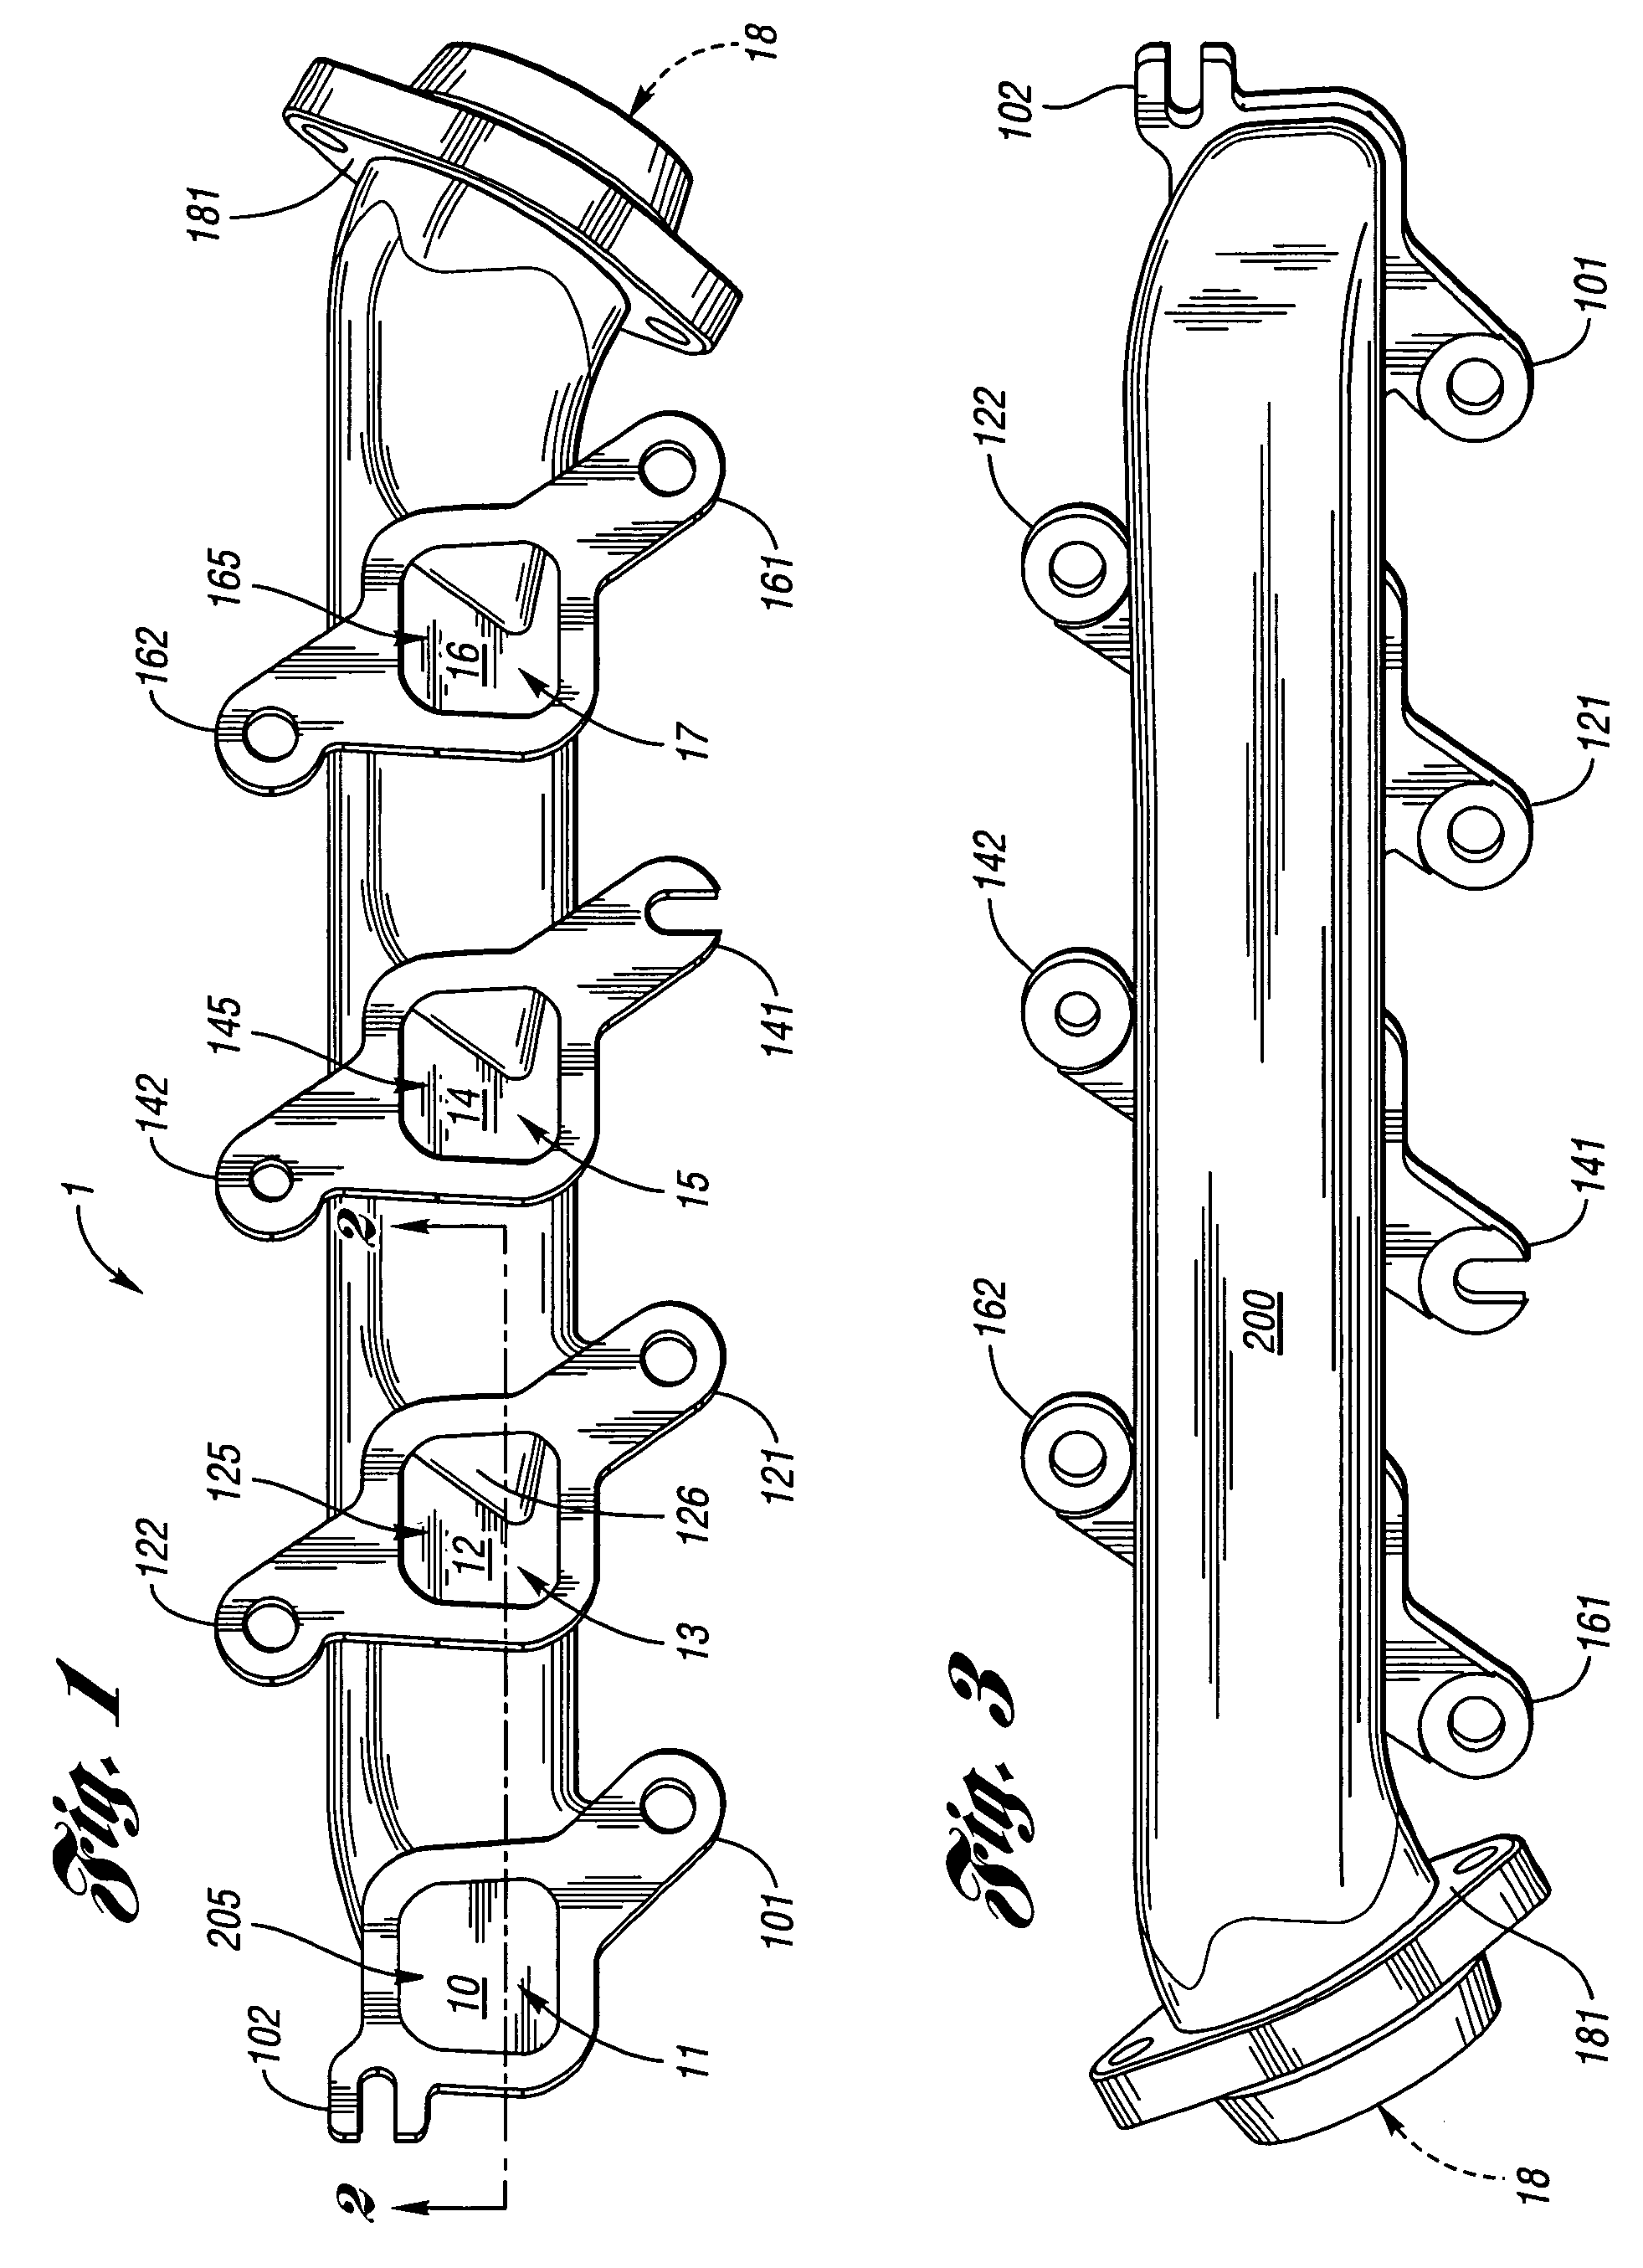 Deflector style exhaust manifold